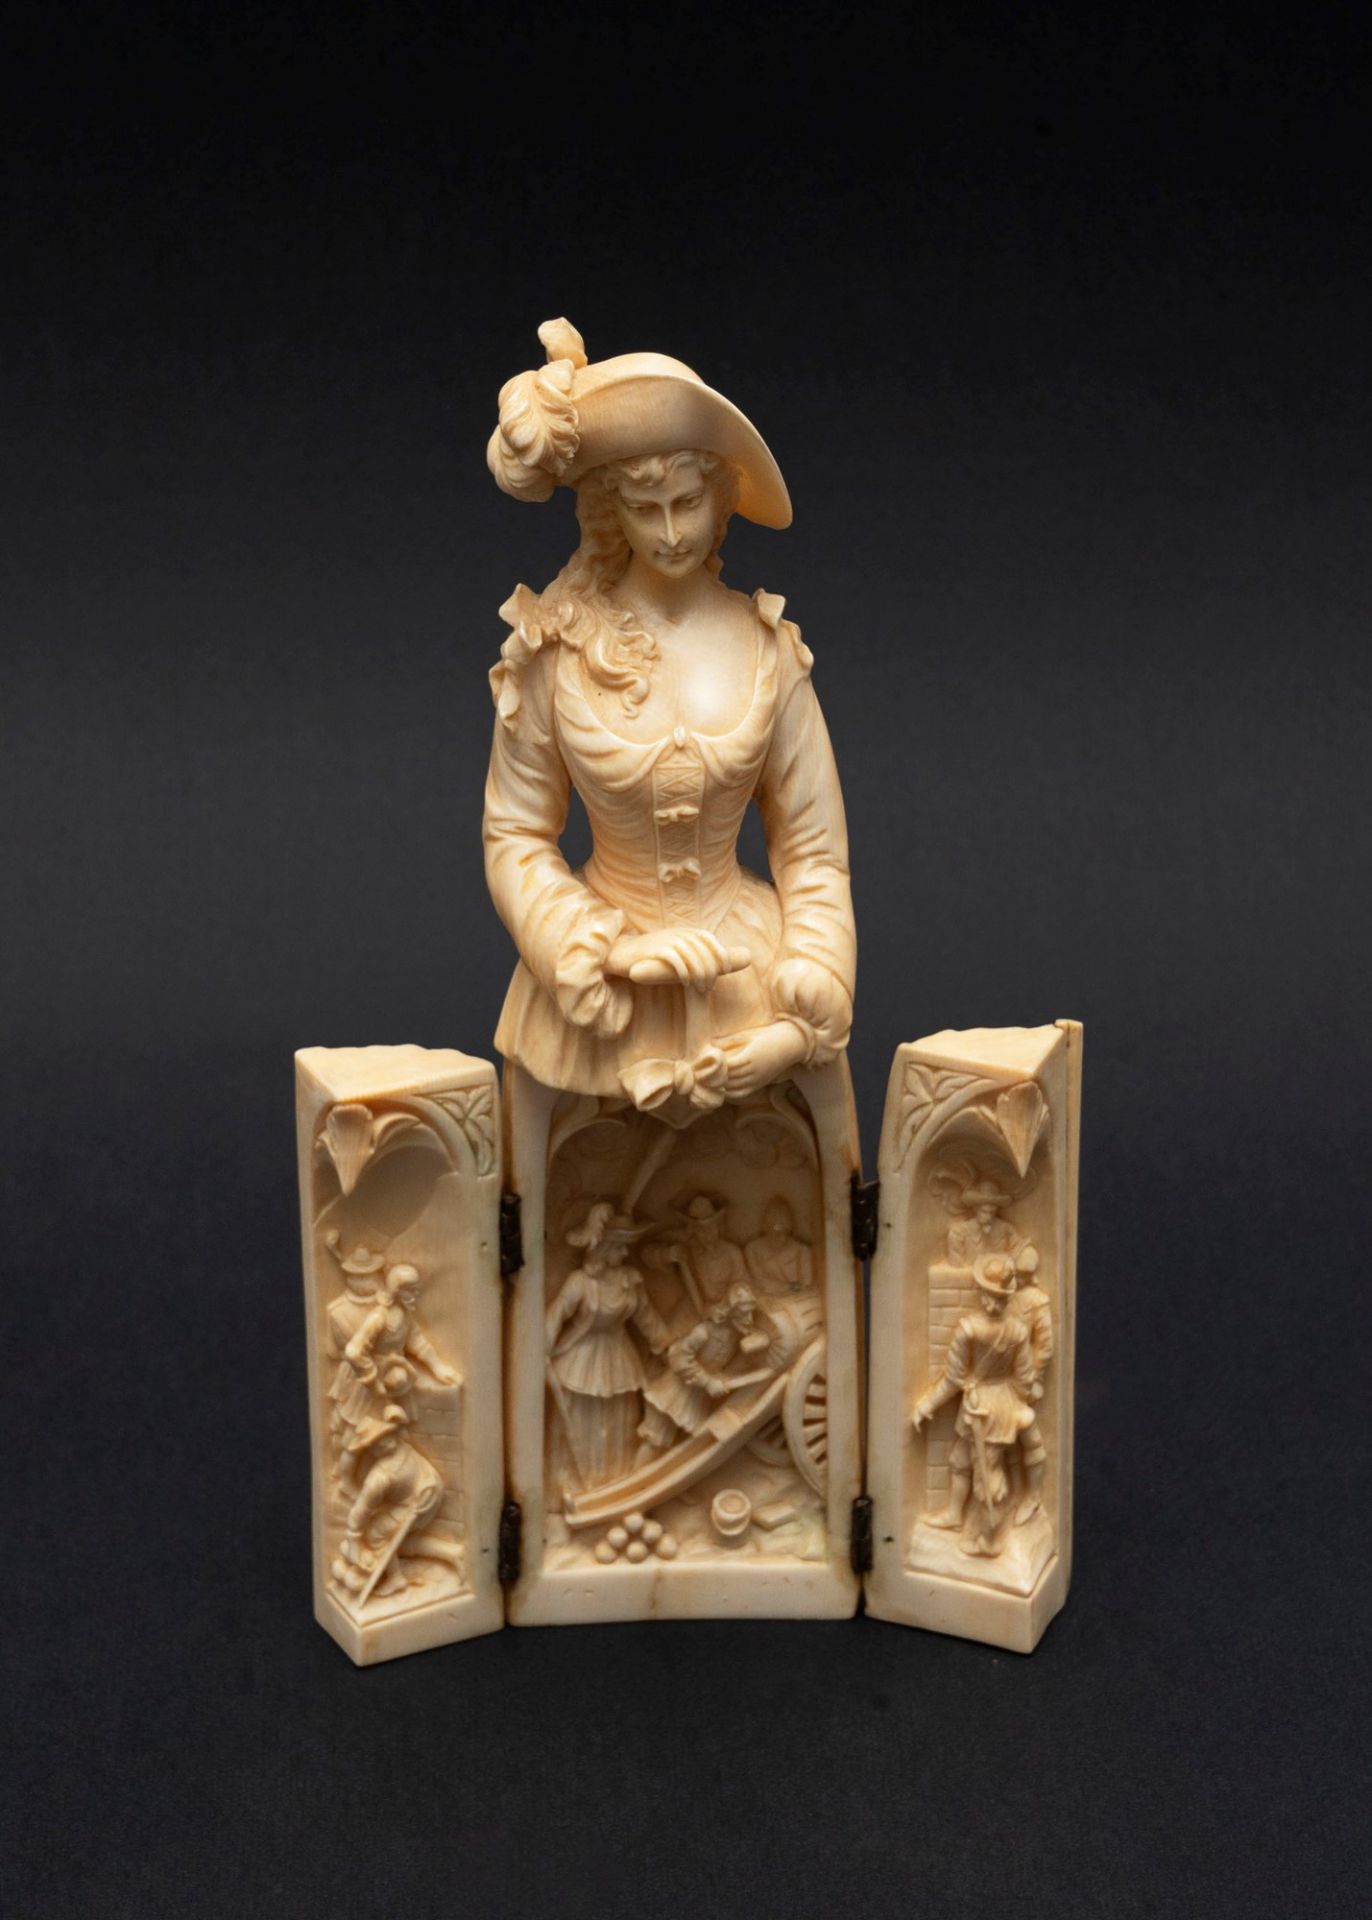 French school, XIX century - ☼ Ivory sculpture depicting a noblewoman with a plumed hat, Dieppe manu